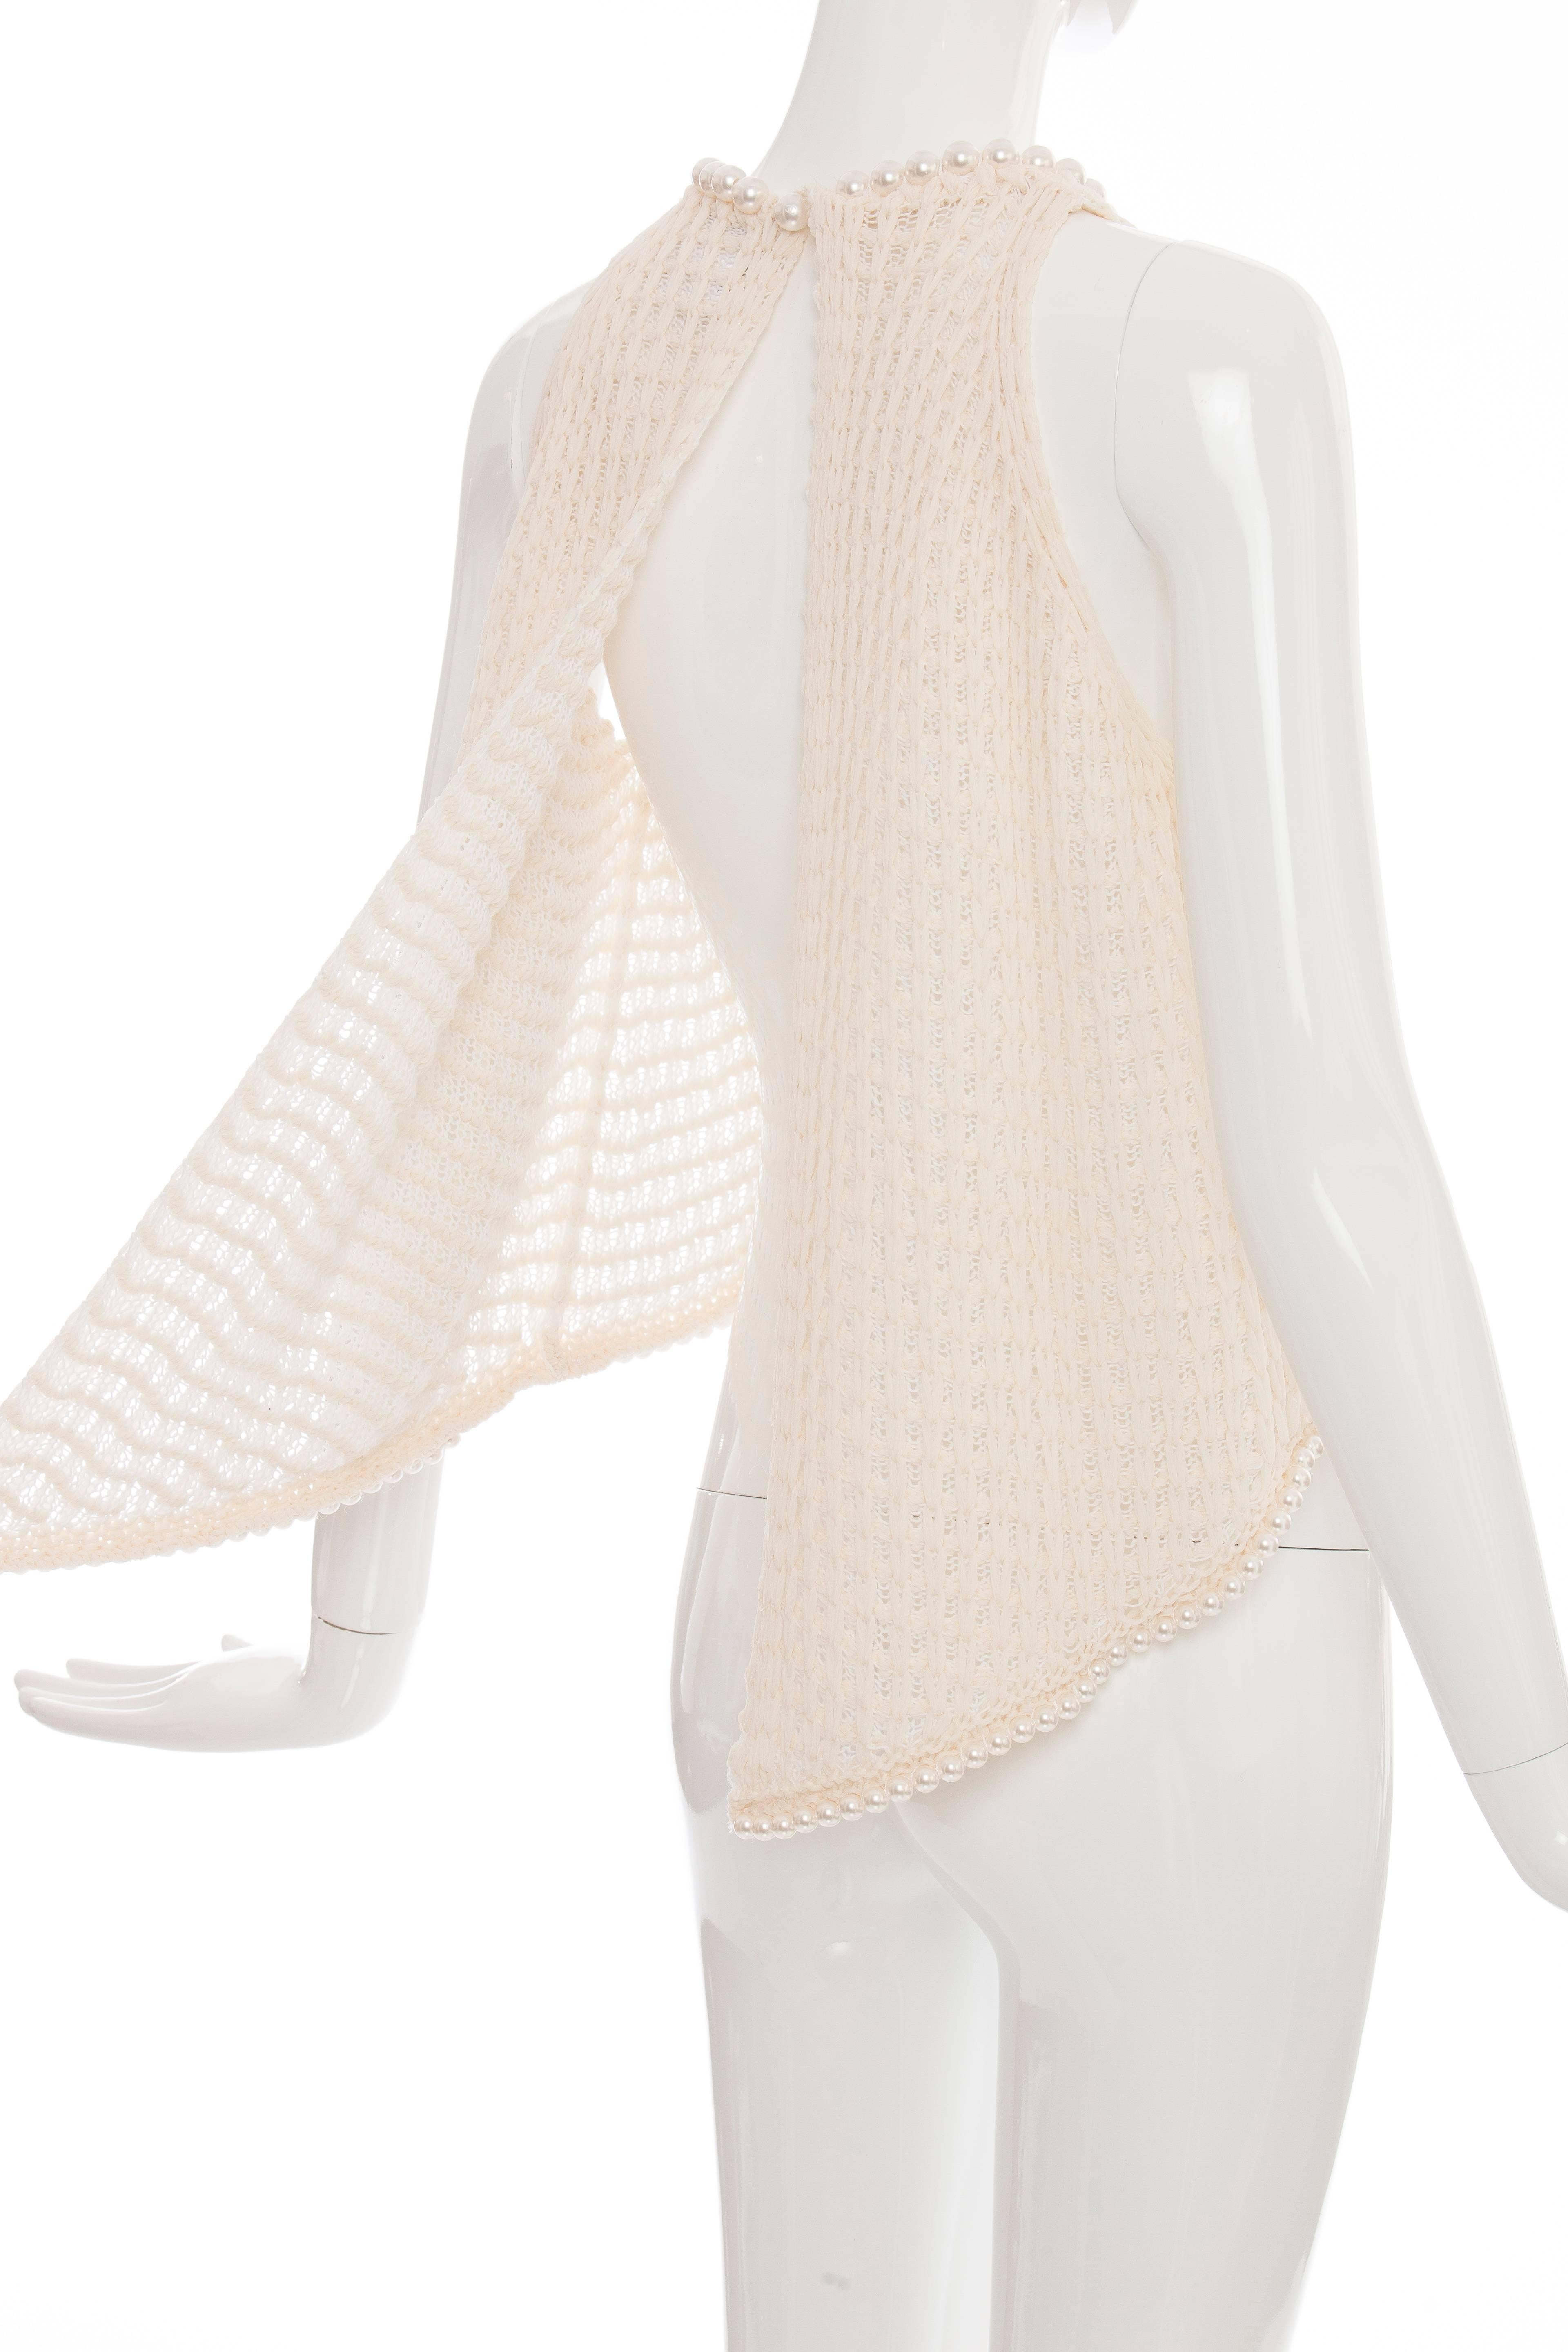 Chanel Cream Silk Blend Open Knit Top With Pearl Embellishments, Spring 2009 3